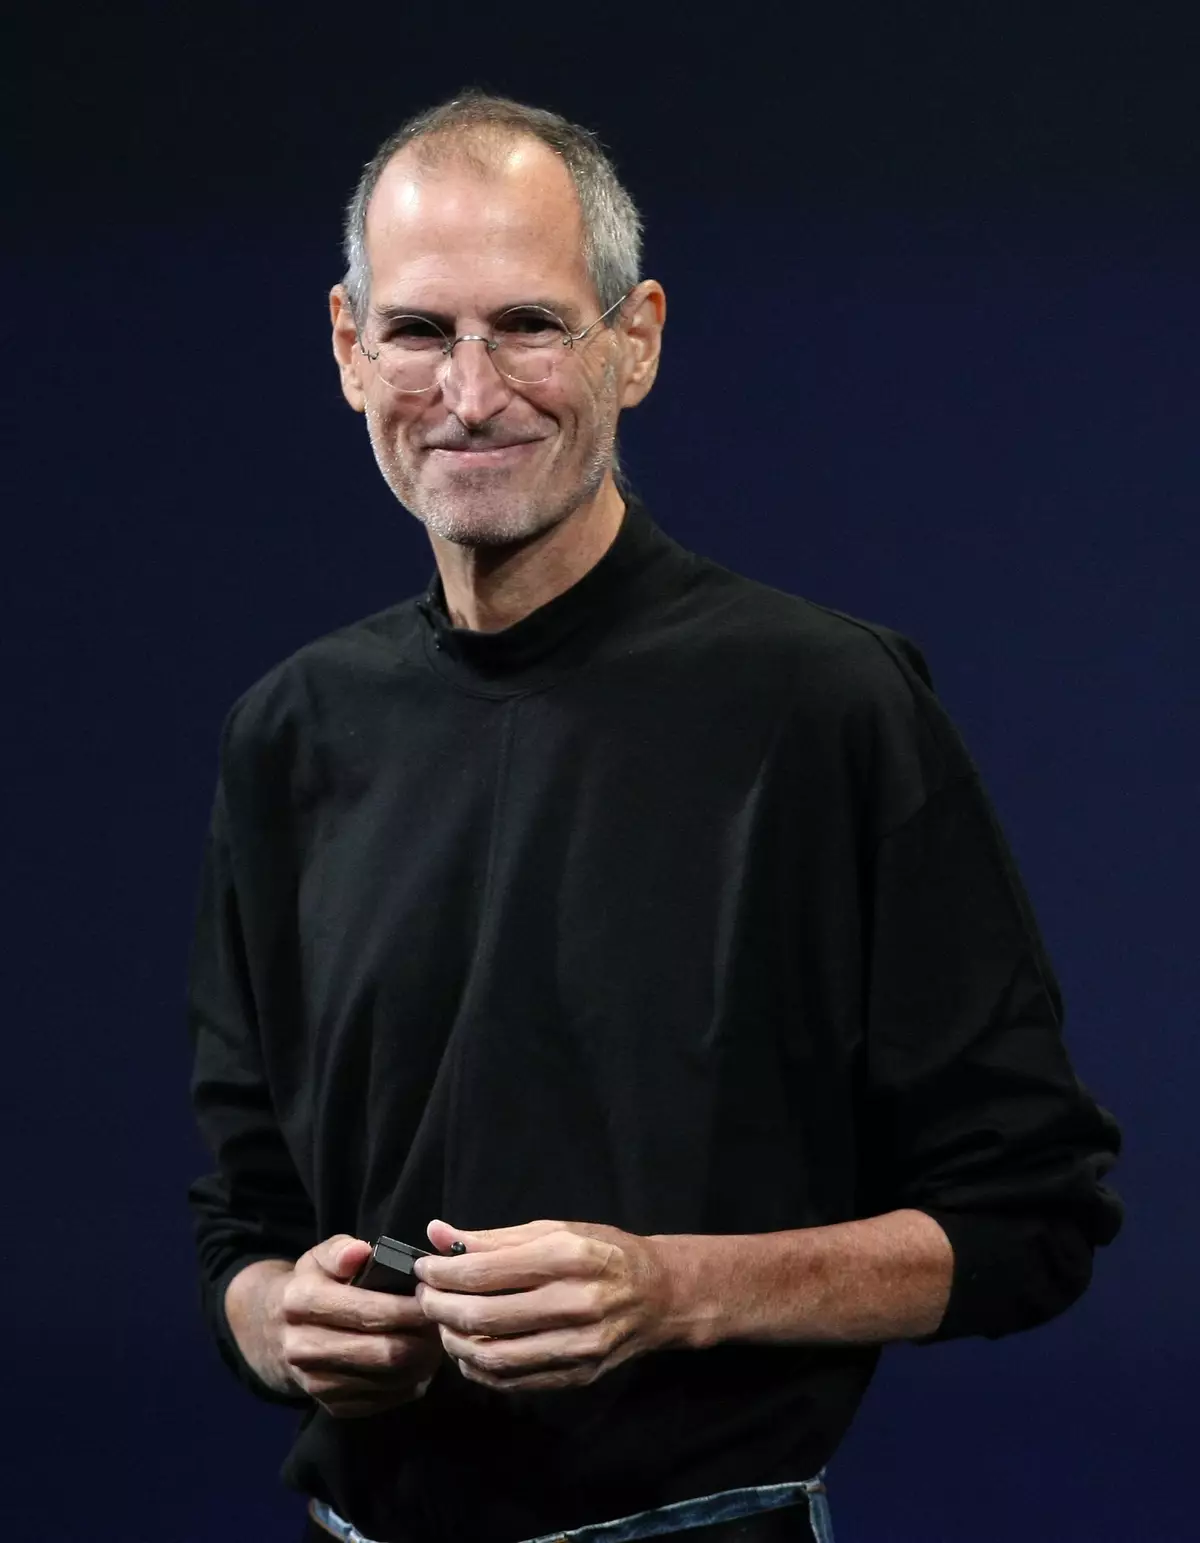 Steve Jobs revealed one of his biggest life regrets in final days ...